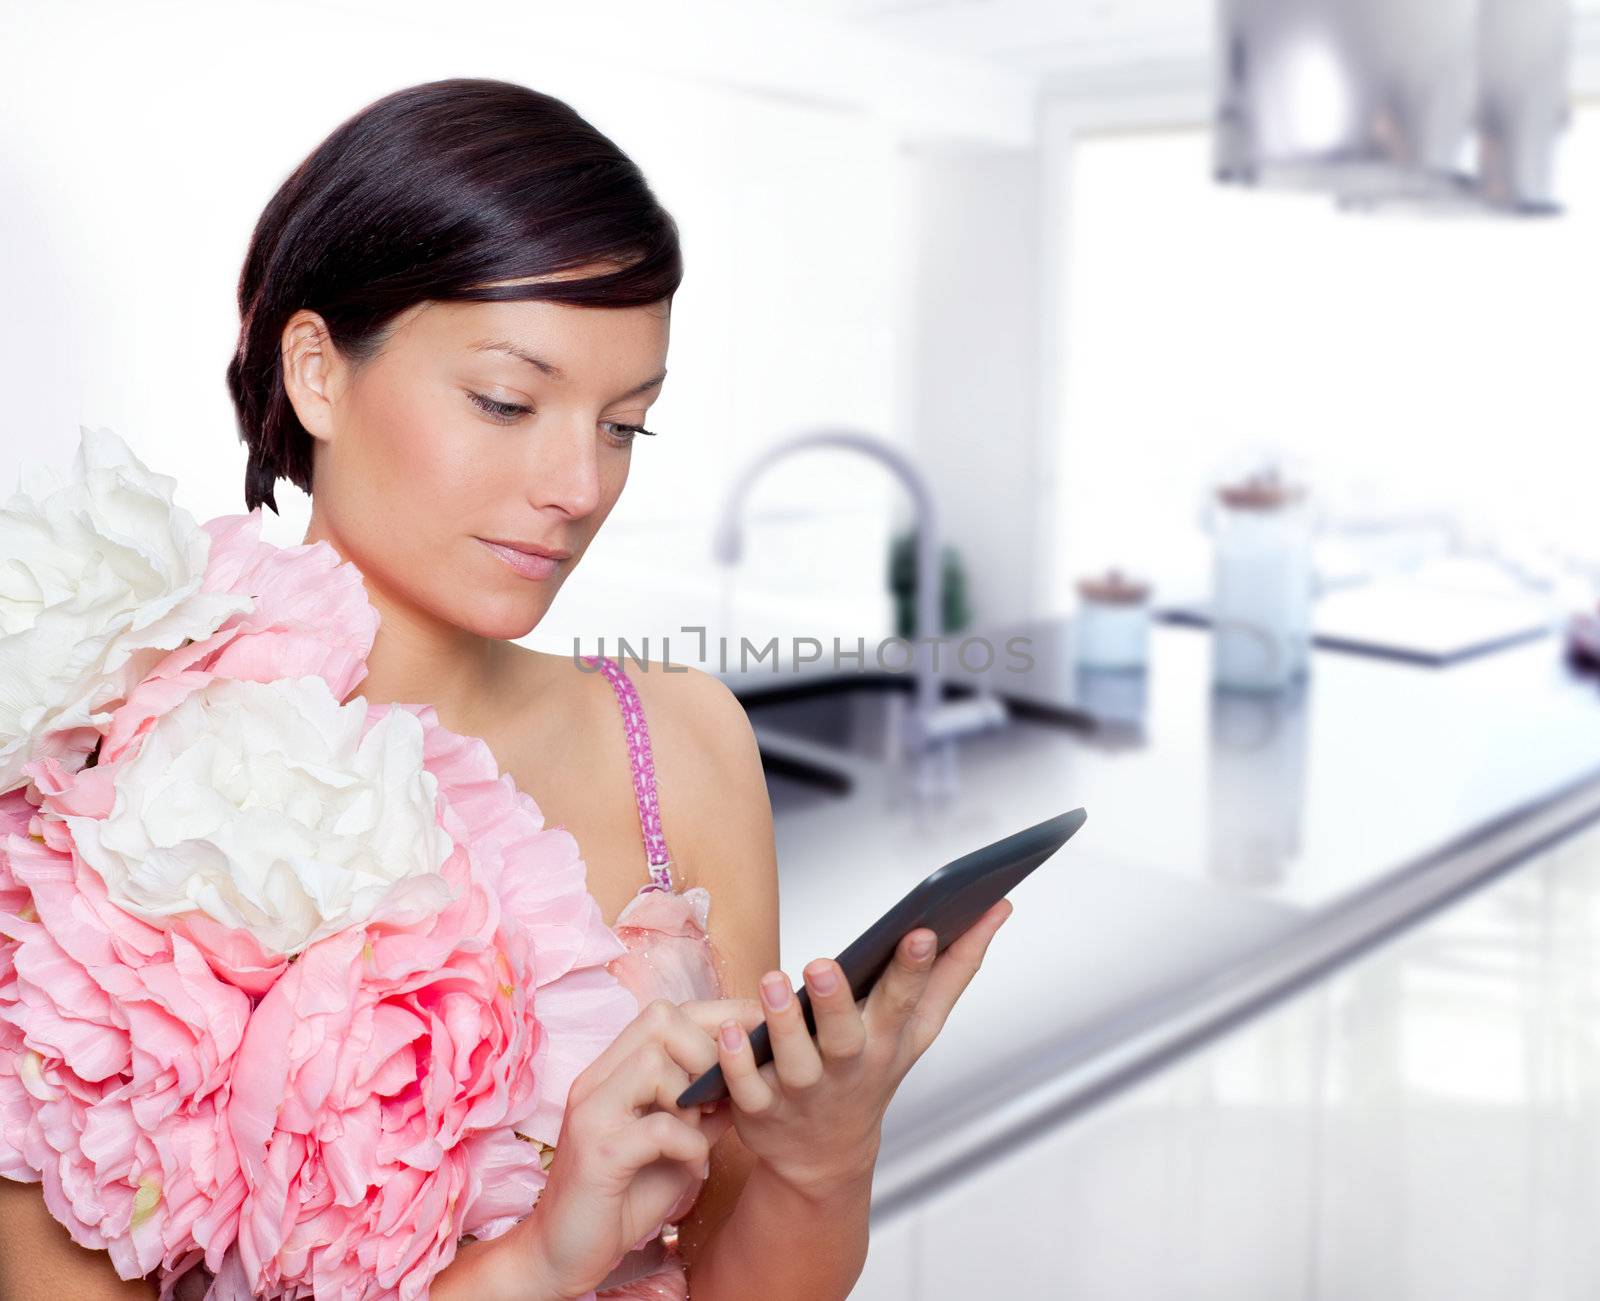 fashion woman and tablet ebook reading on kitchen with spring pink flowers dress